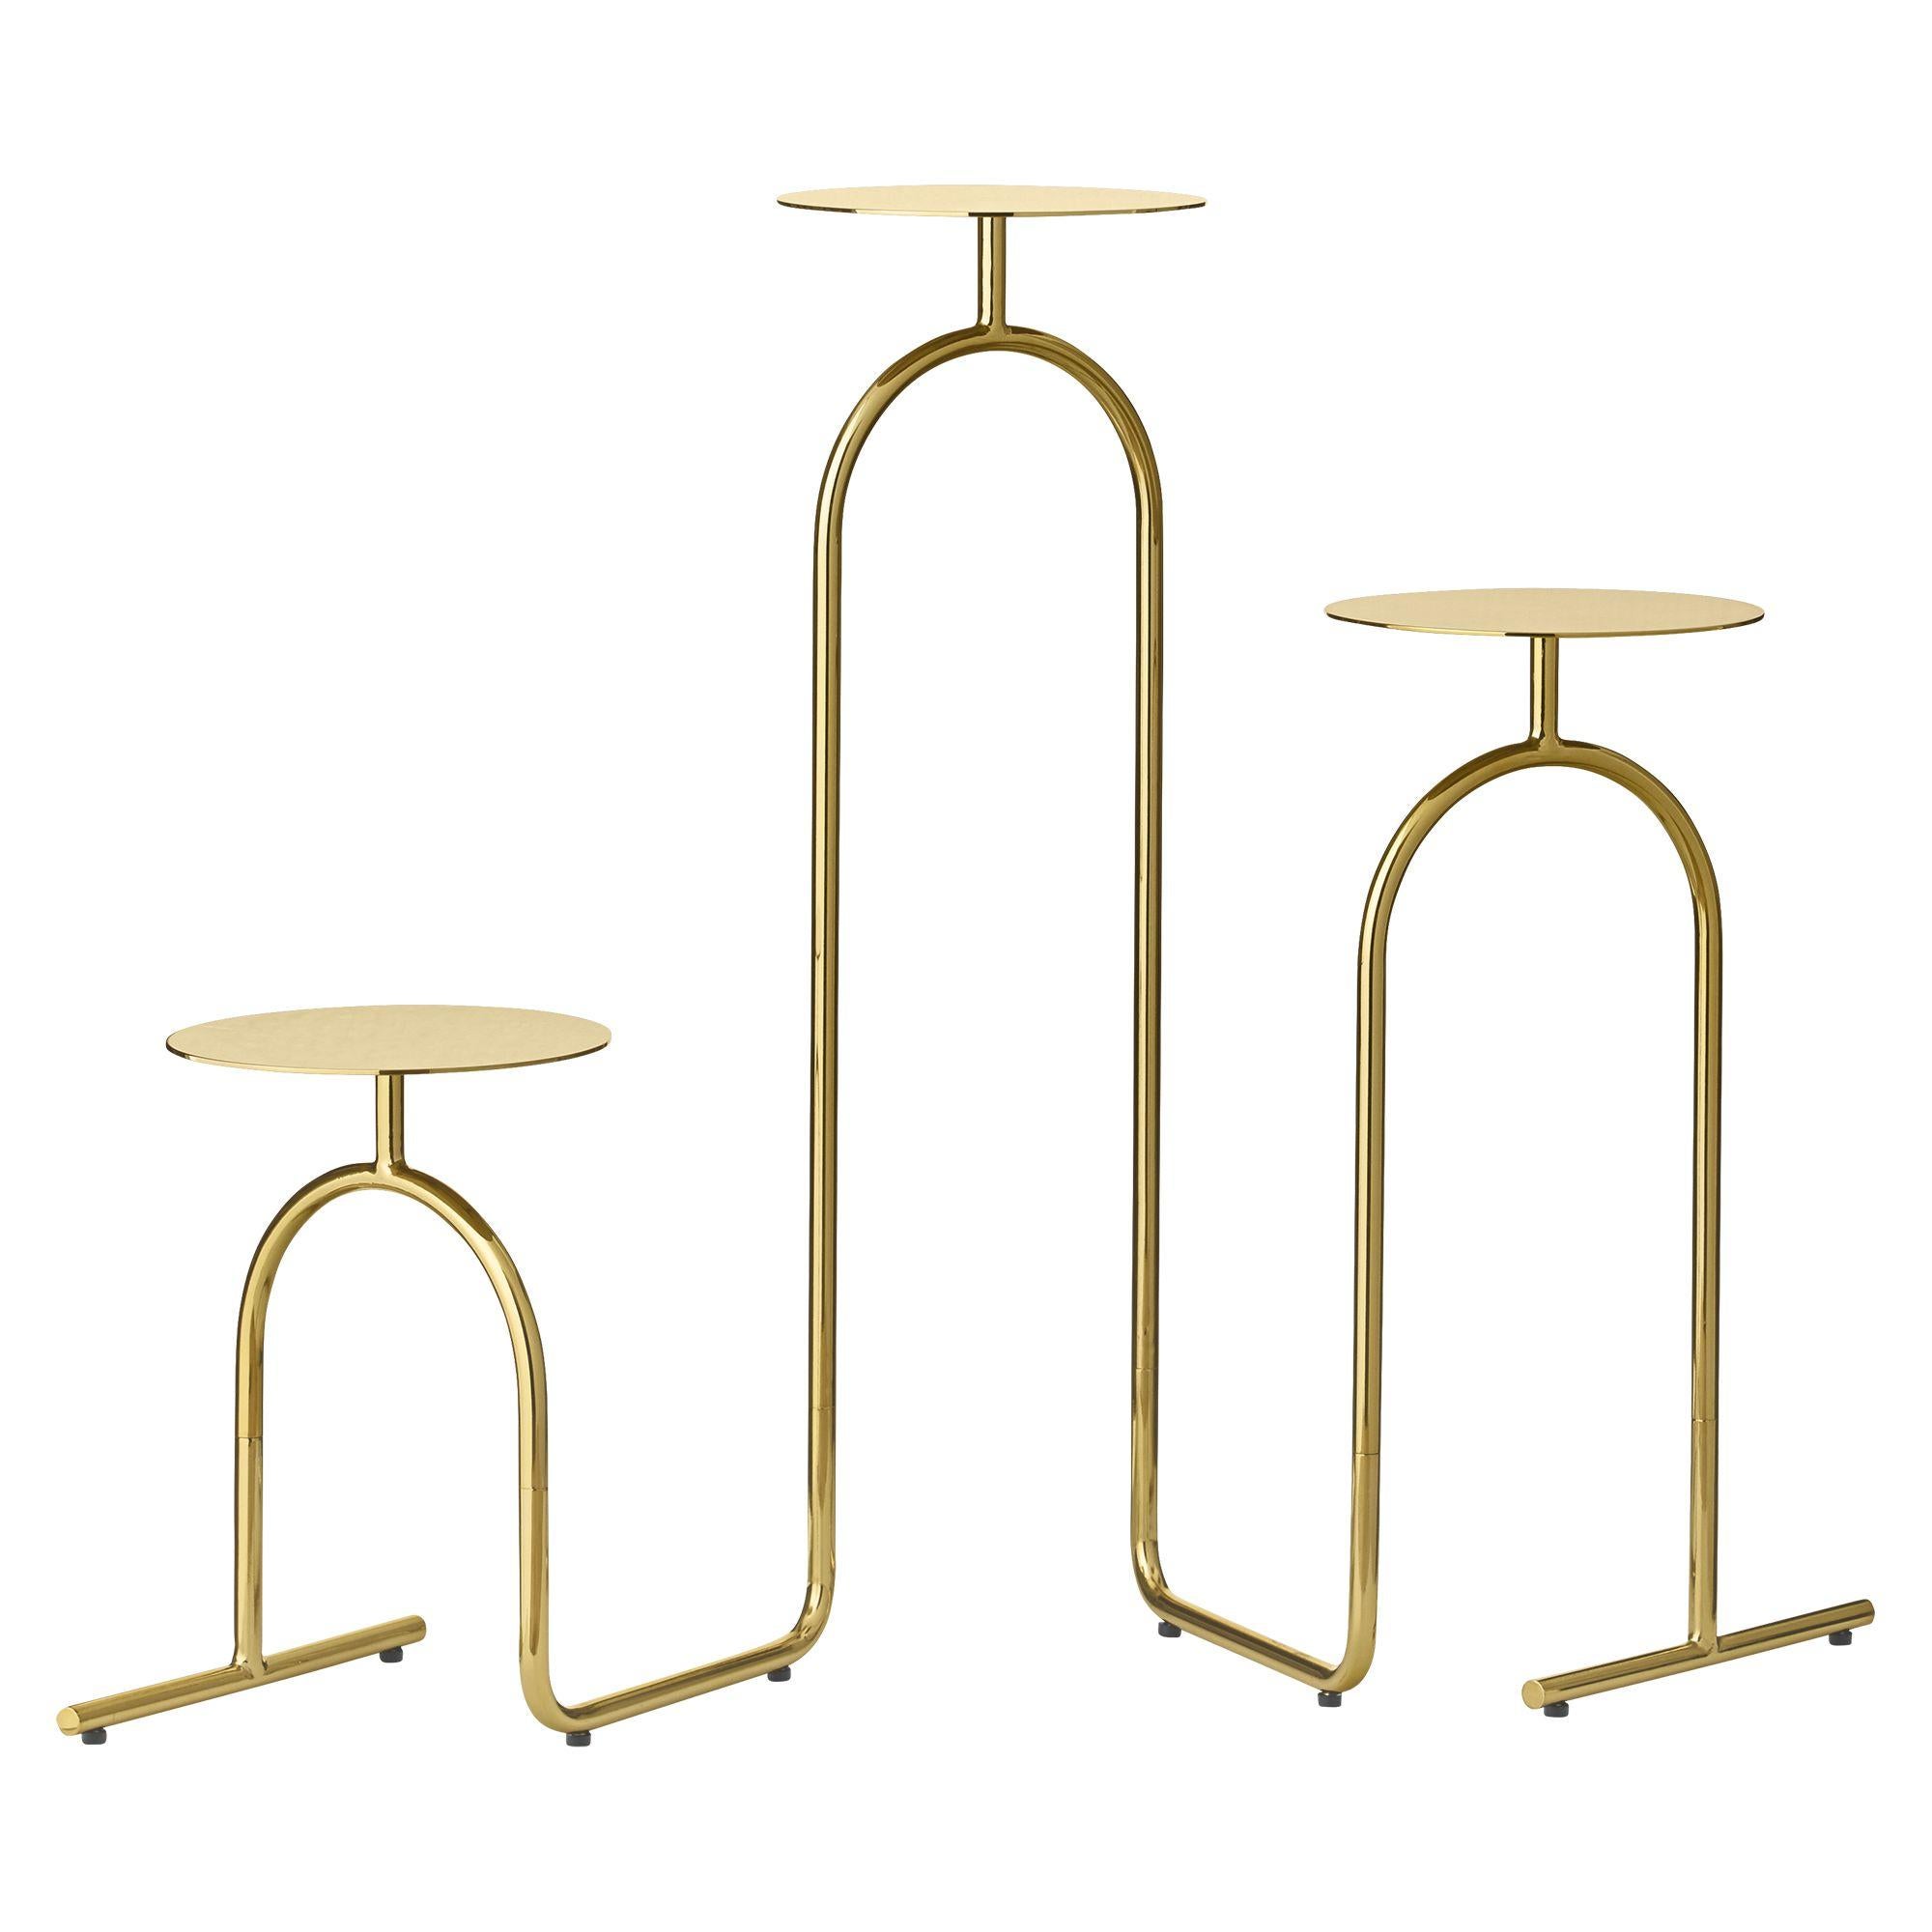 Gold minimalist pedestal table
Dimensions: D 53.4 x W 22 x H 75 cm 
Materials: Steel. 
Available in black. 

Sometimes the absolute smallest things are what matter the absolute most to us. It's the details in our lives, that sculpt the